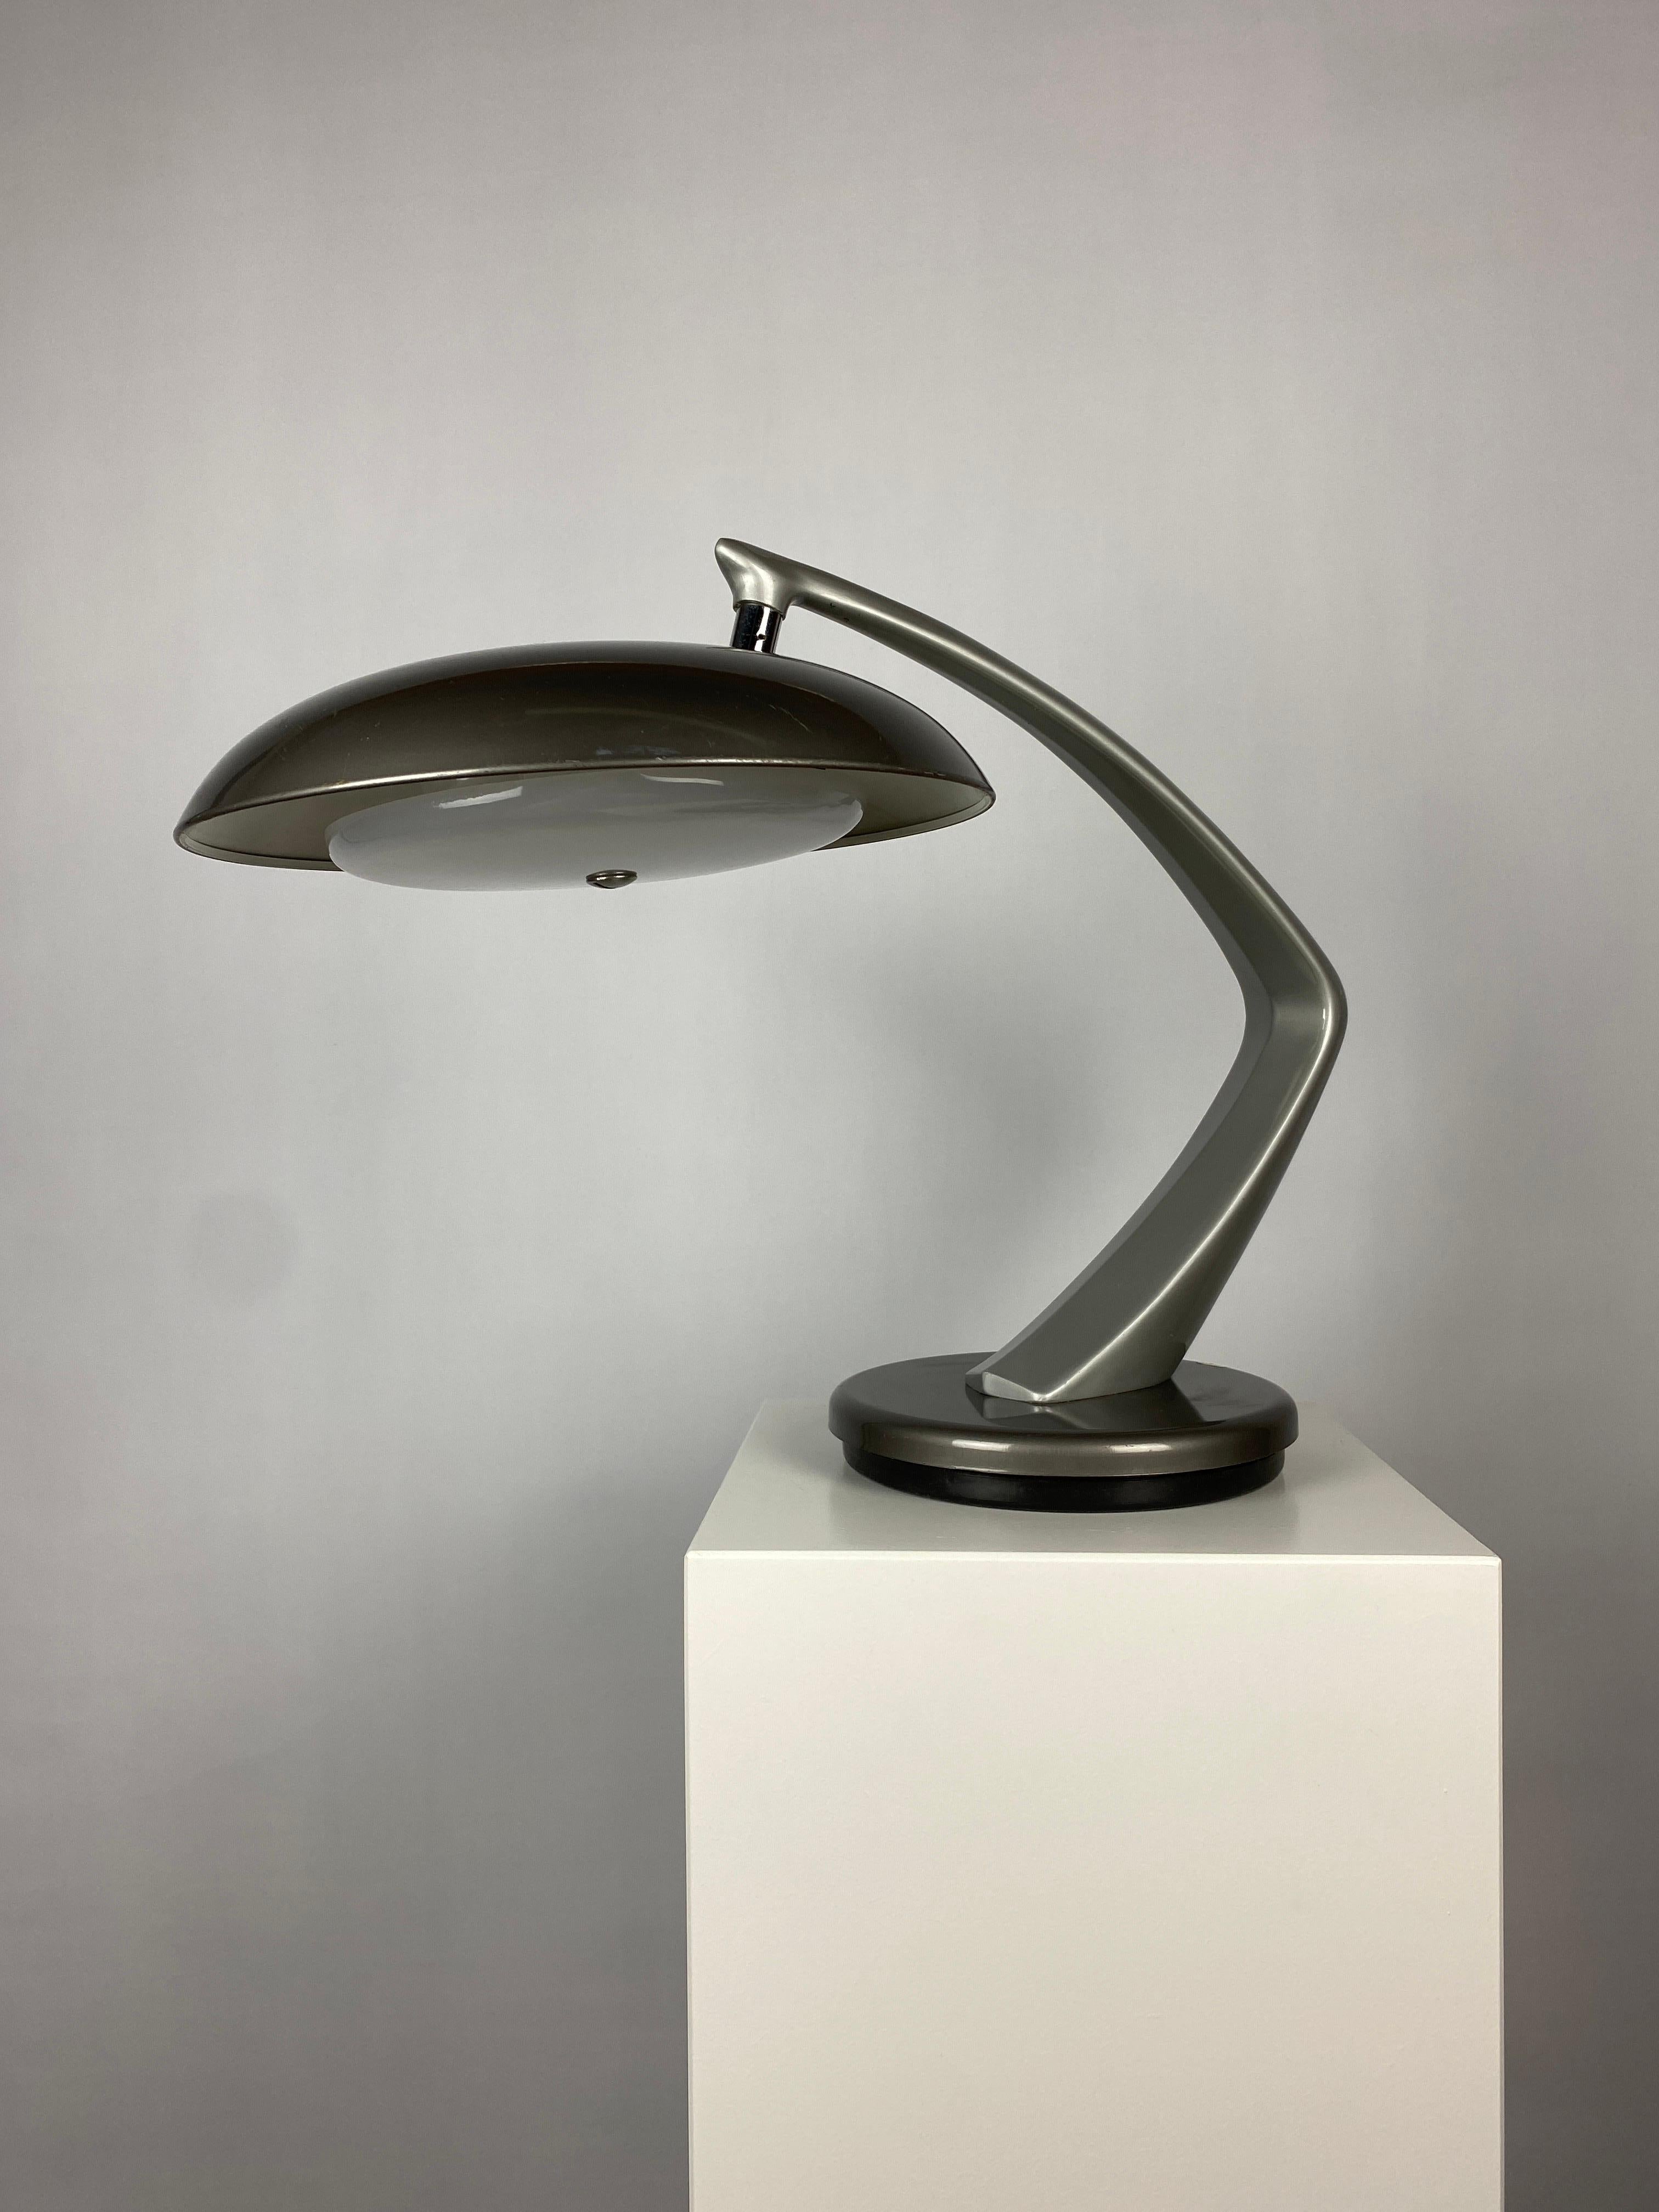 What a beauty! This is one of the classics in silver and dark grey colour. The FASE Boomerang 64 desk light is manufactured in the 1960's by the company FASE Madrid. 

The base can normally spin in a 360º rotation but this one does not fully spin